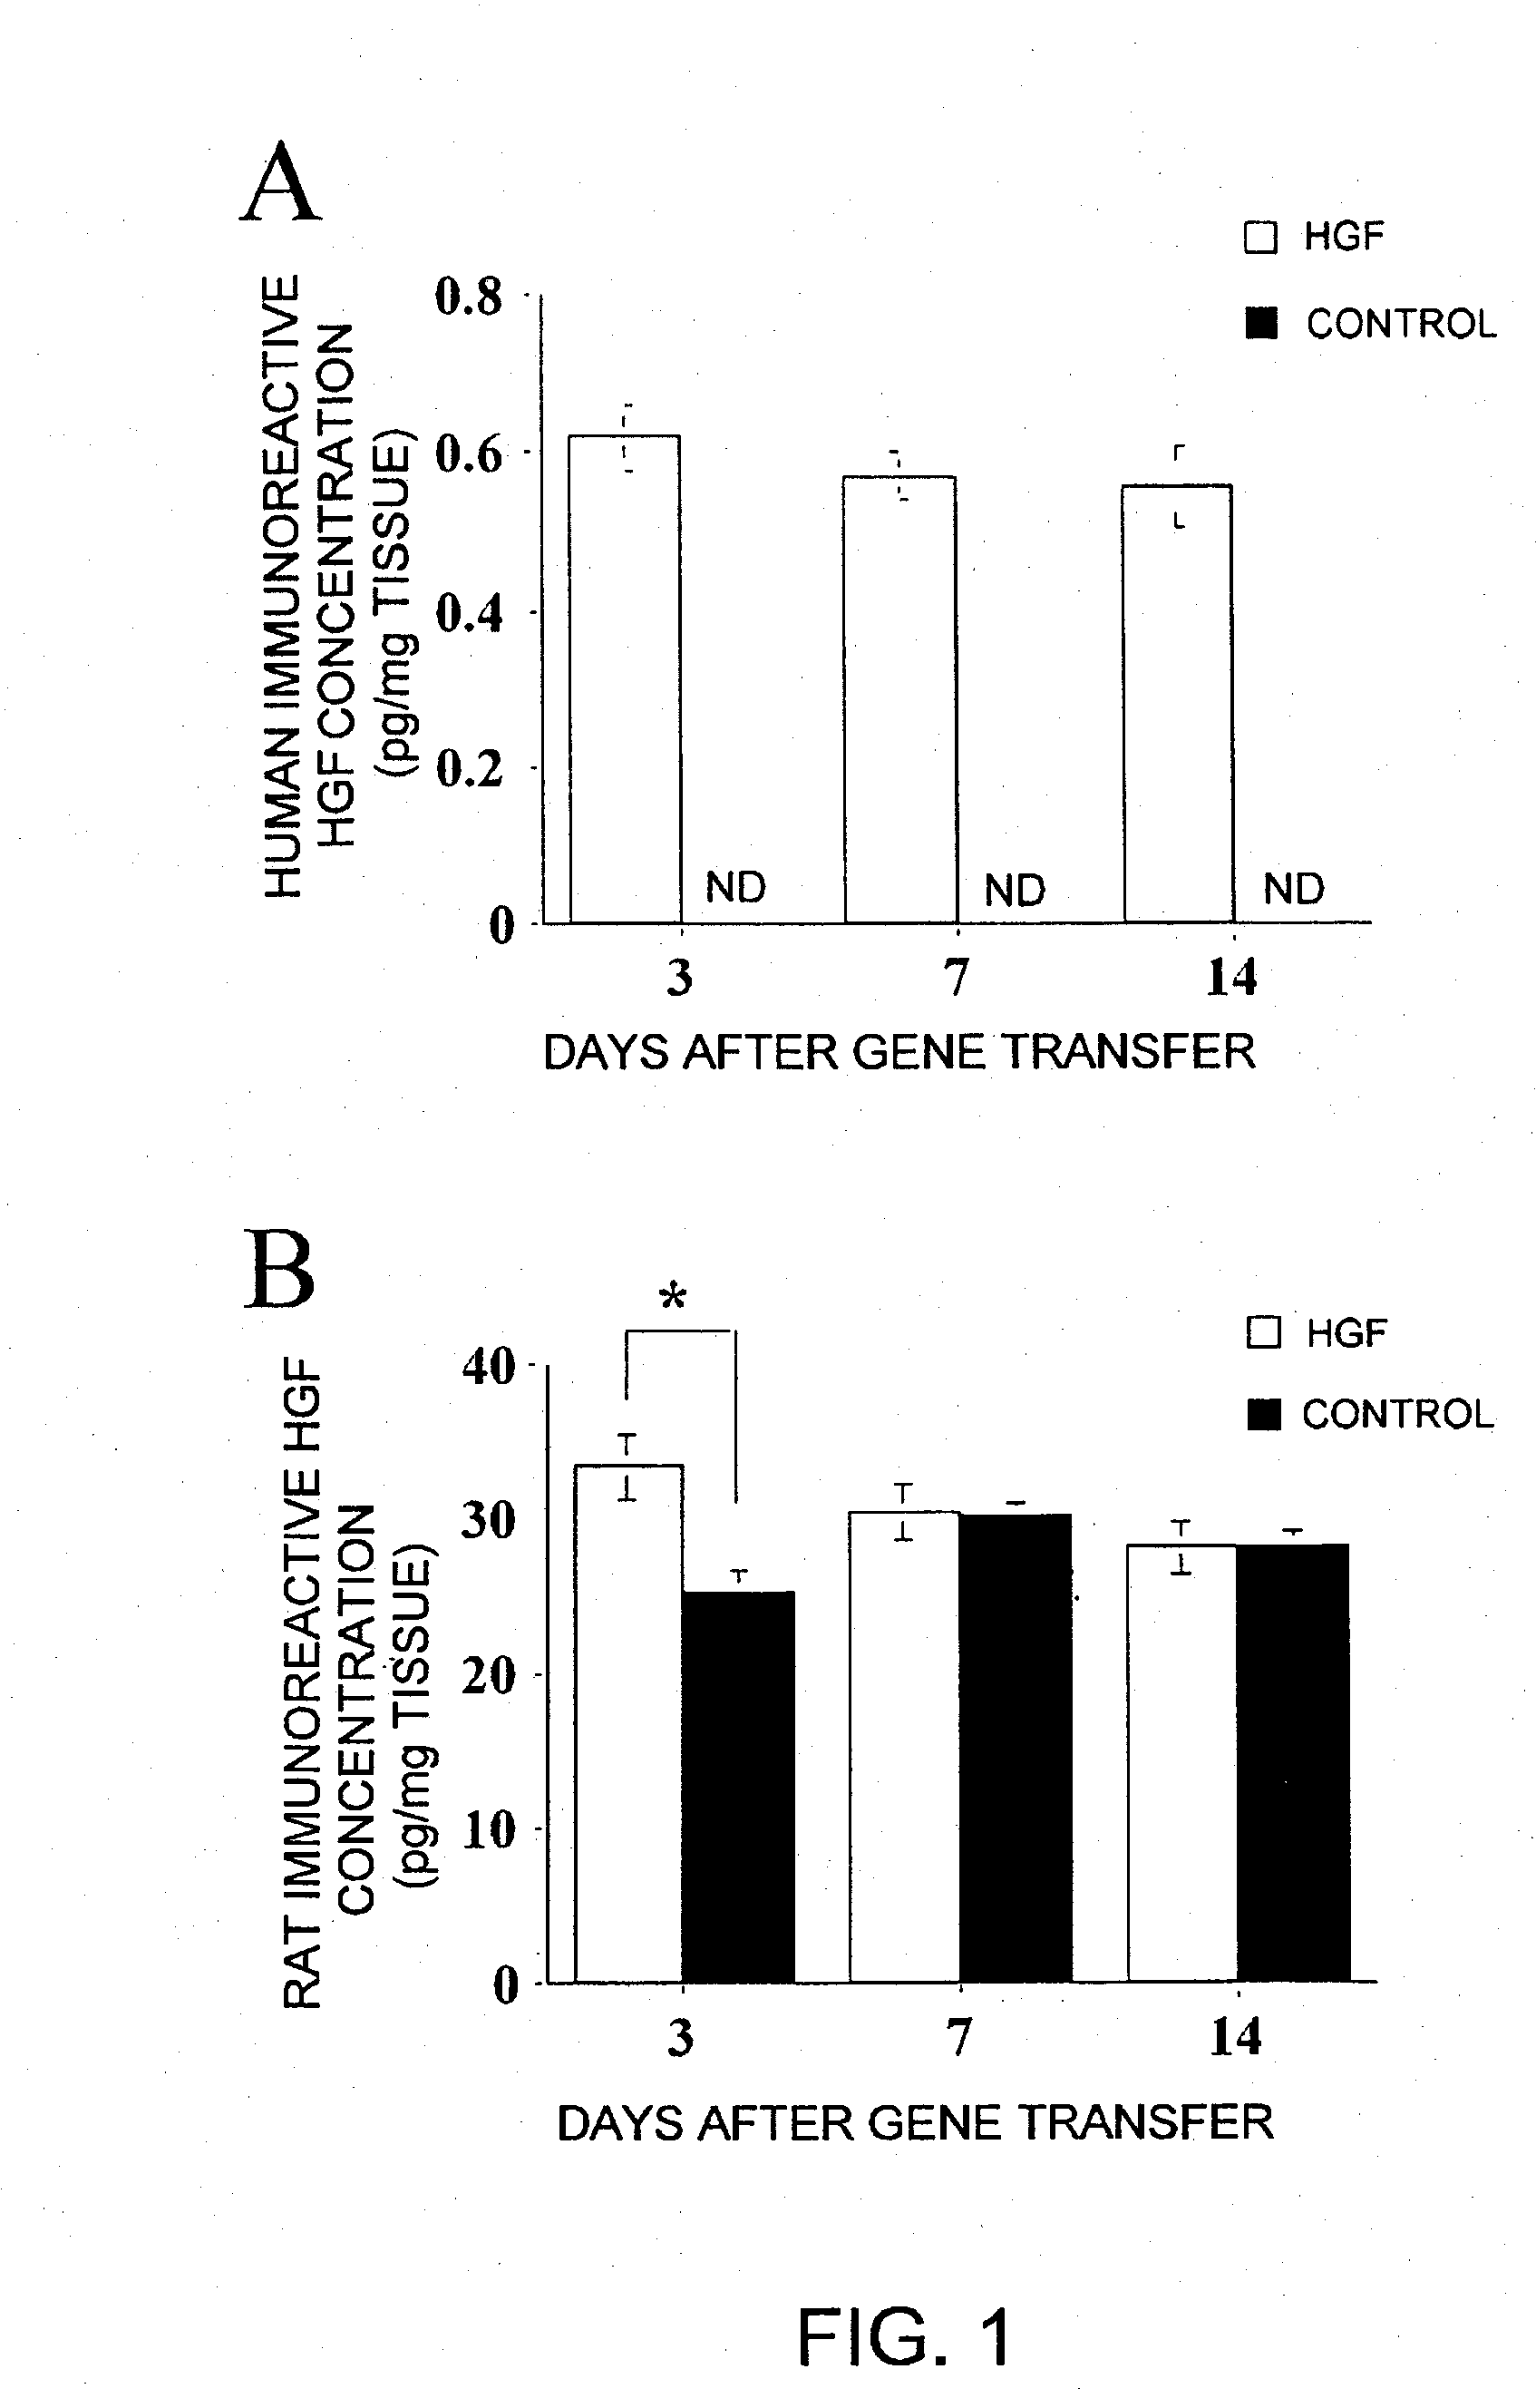 Method of treating skin wounds with vectors encoding hepatocyte growth factor